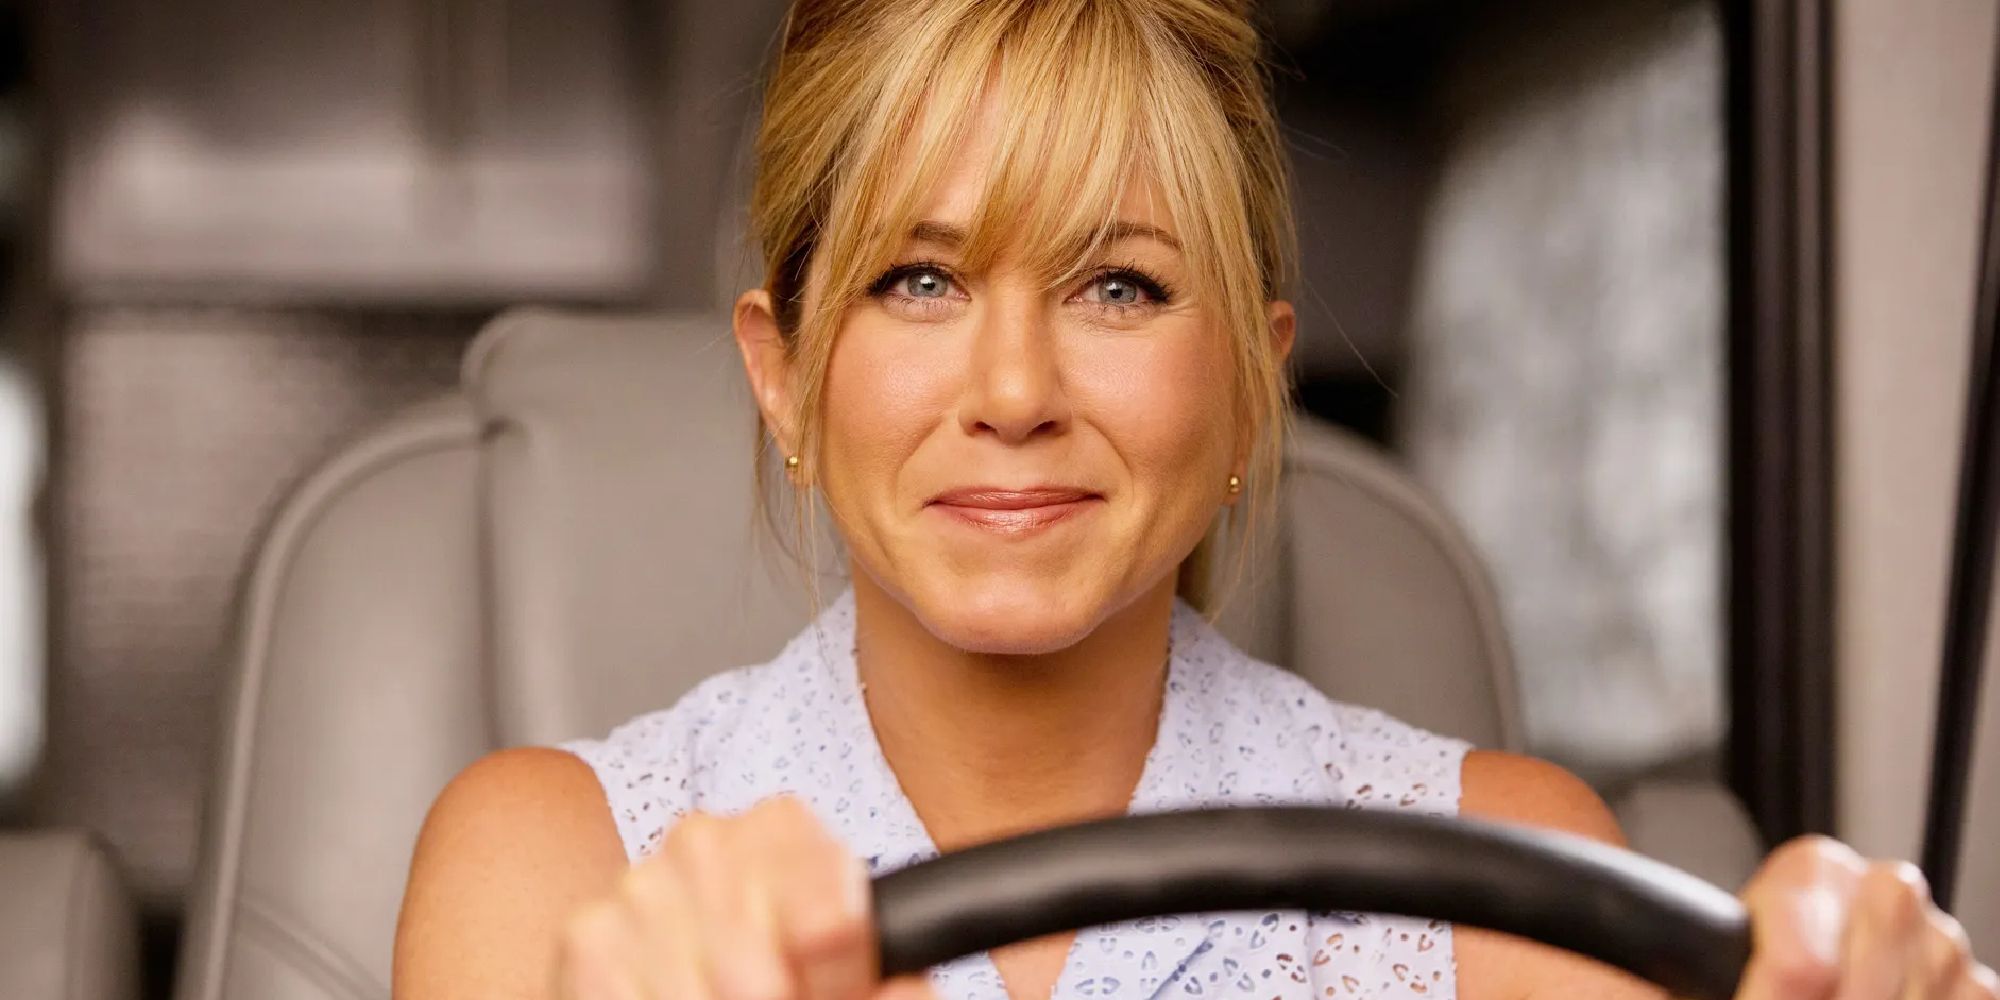 Jennifer Aniston in We’re the Millers